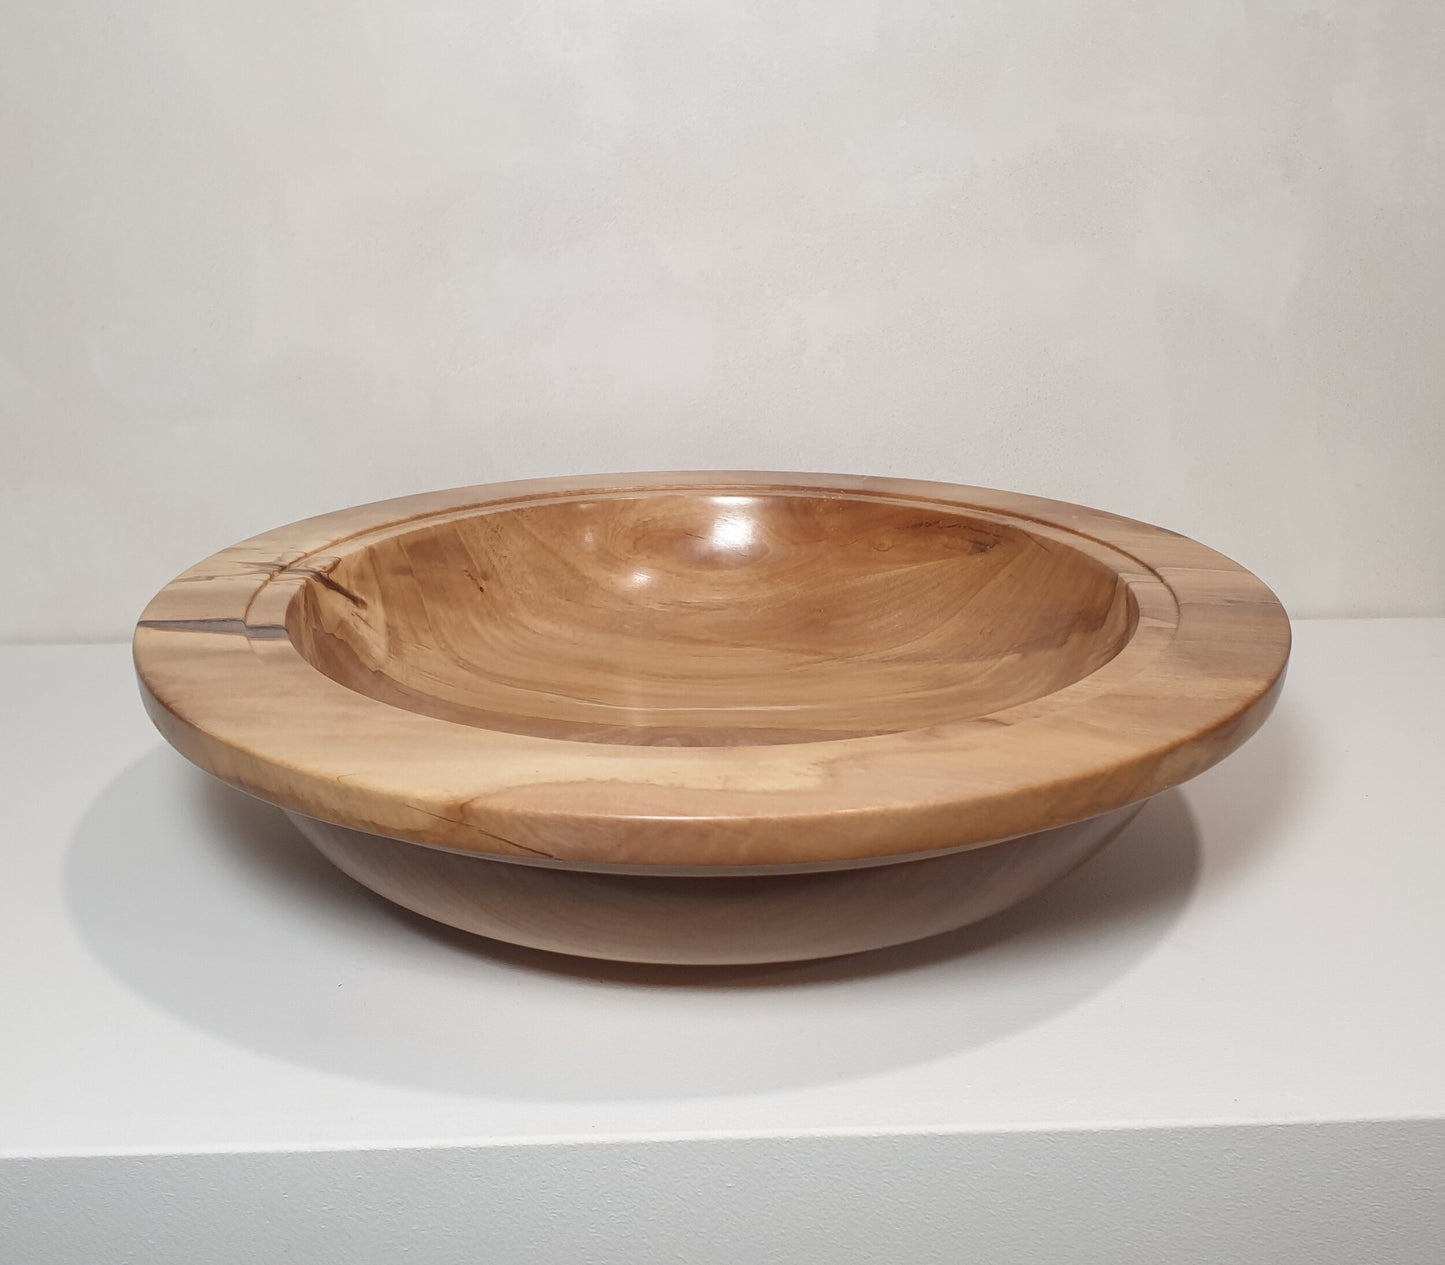 Olive Wood Plate with Resin on Rim